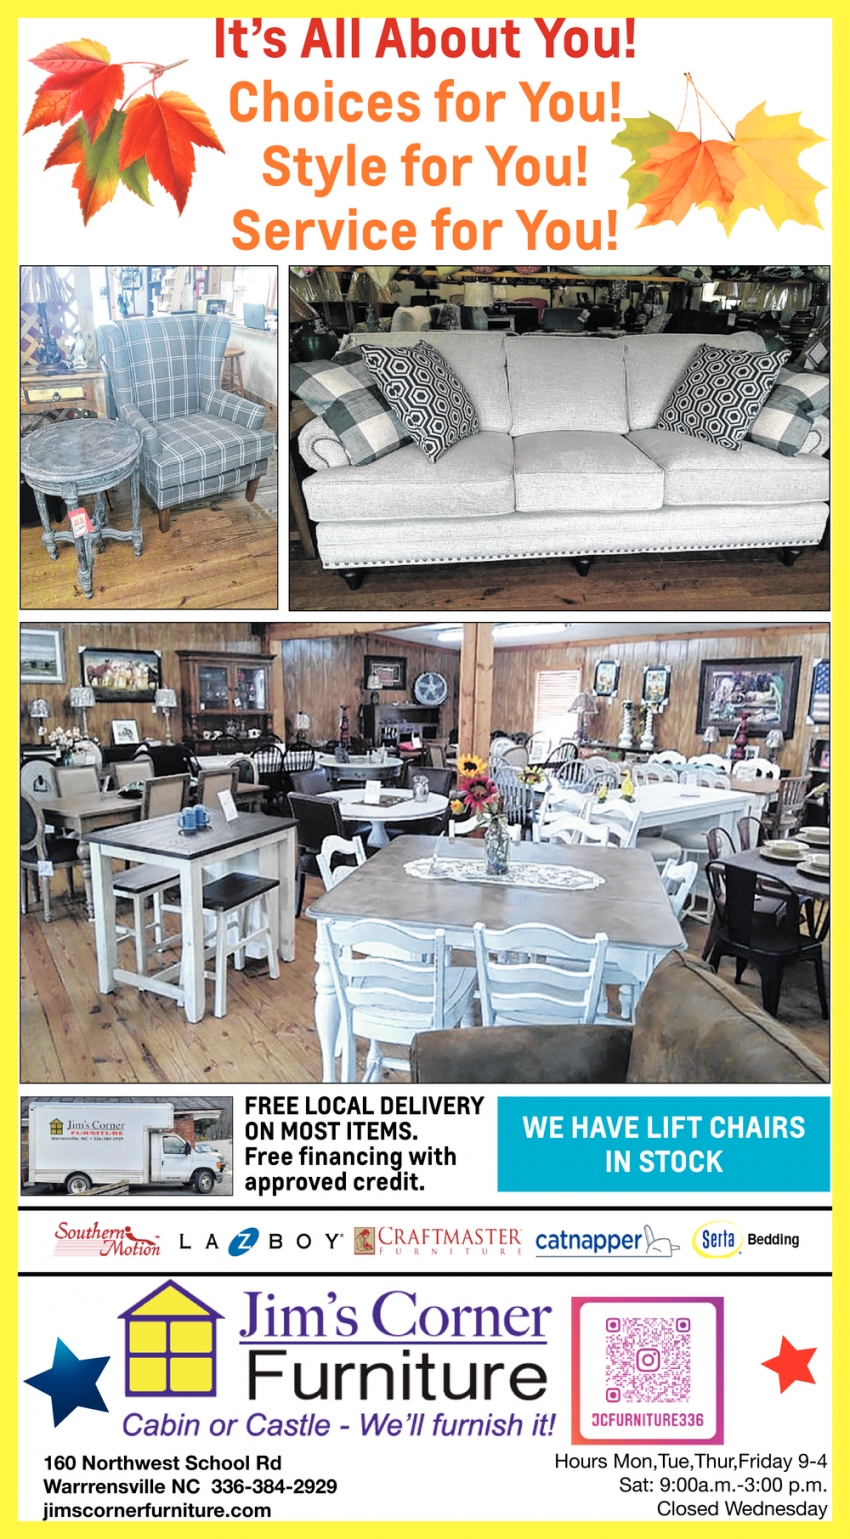 Get Ready For Those Cool Evenings With Comfy Seats From Jim's Corner